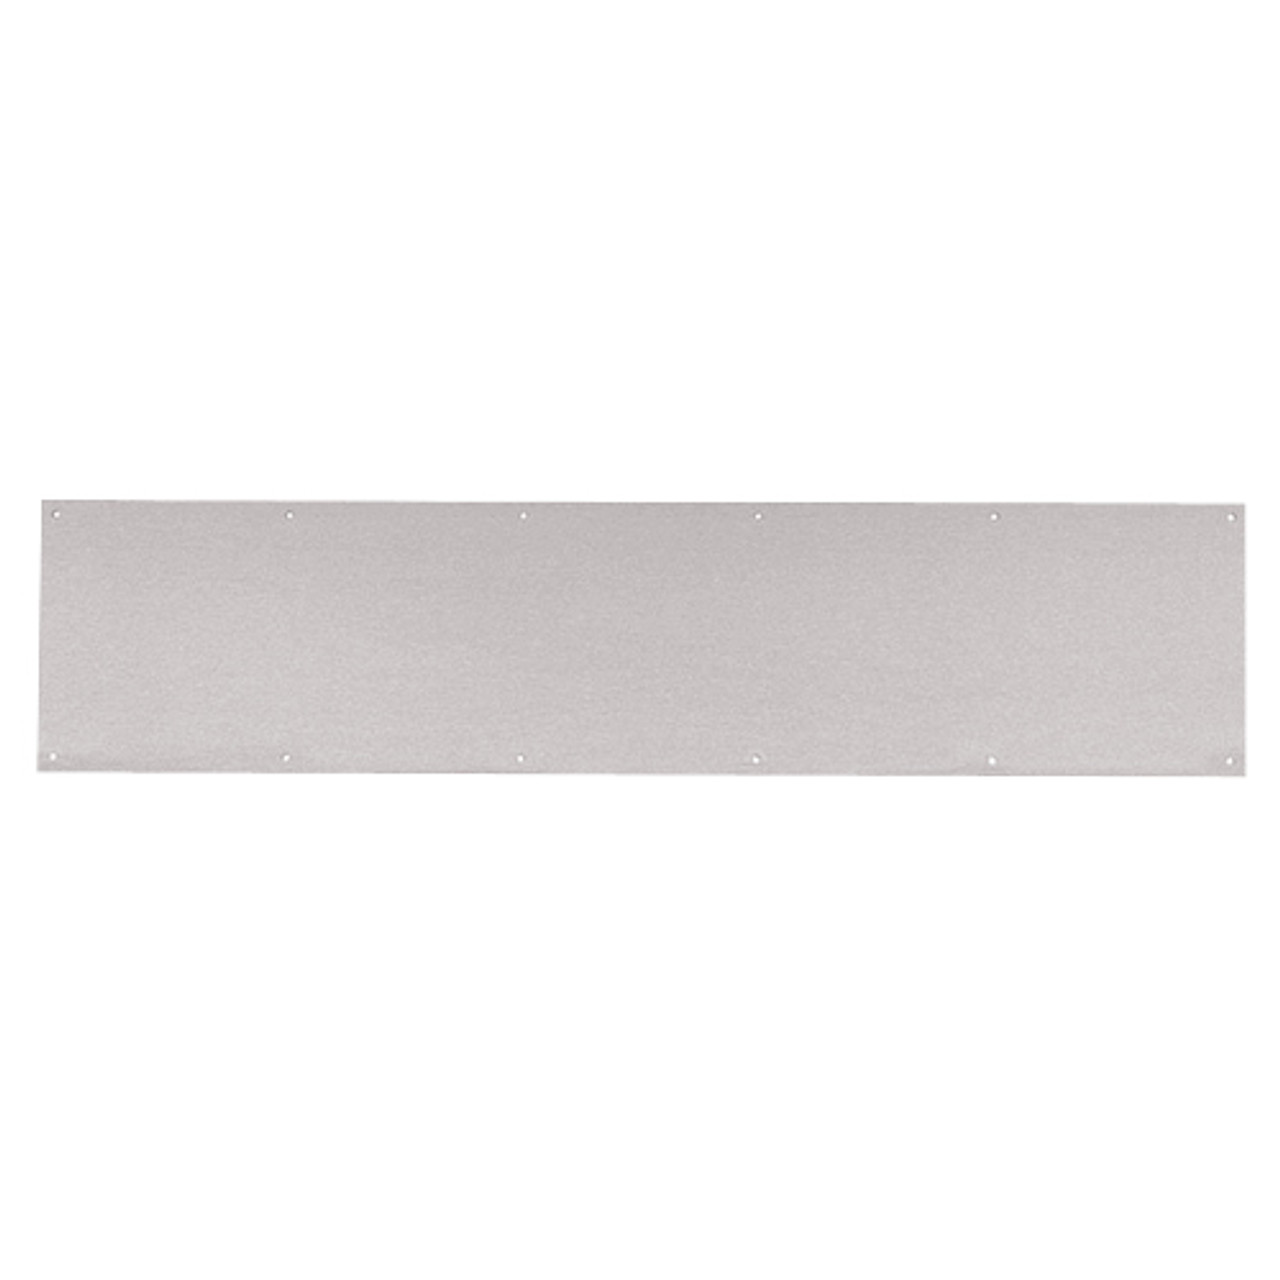 8400-US32D-6x32-B-CS Ives 8400 Series Protection Plate in Satin Stainless Steel